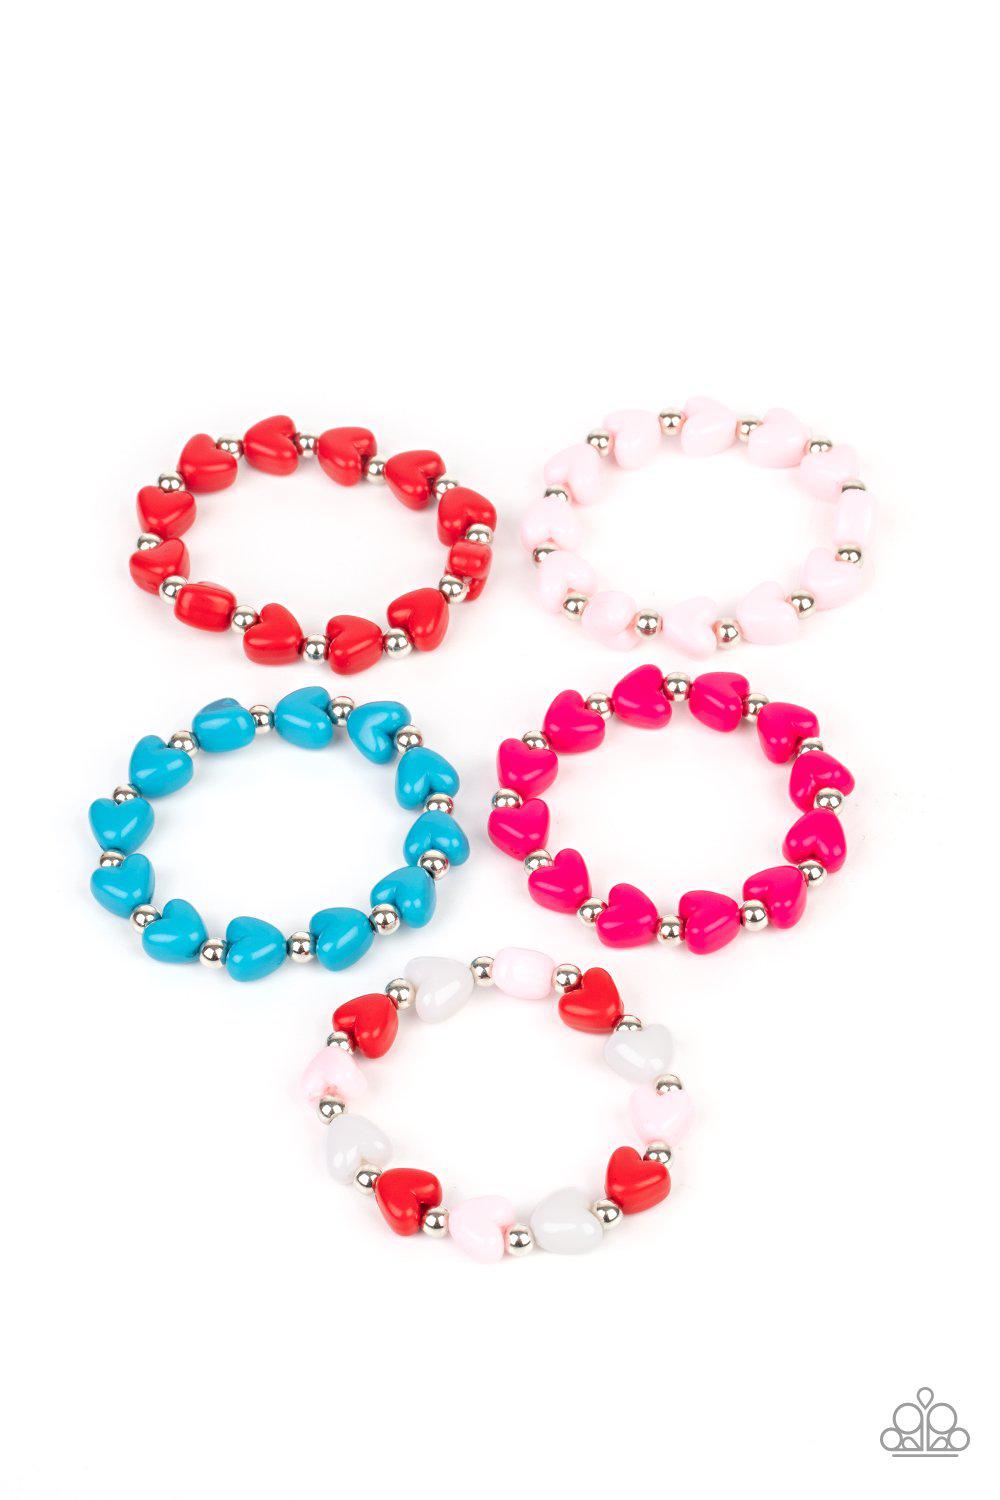 Starlet Shimmer Children&#39;s Red, Pink and Blue Heart Bracelets - Paparazzi Accessories (set of 5) - Full set -CarasShop.com - $5 Jewelry by Cara Jewels